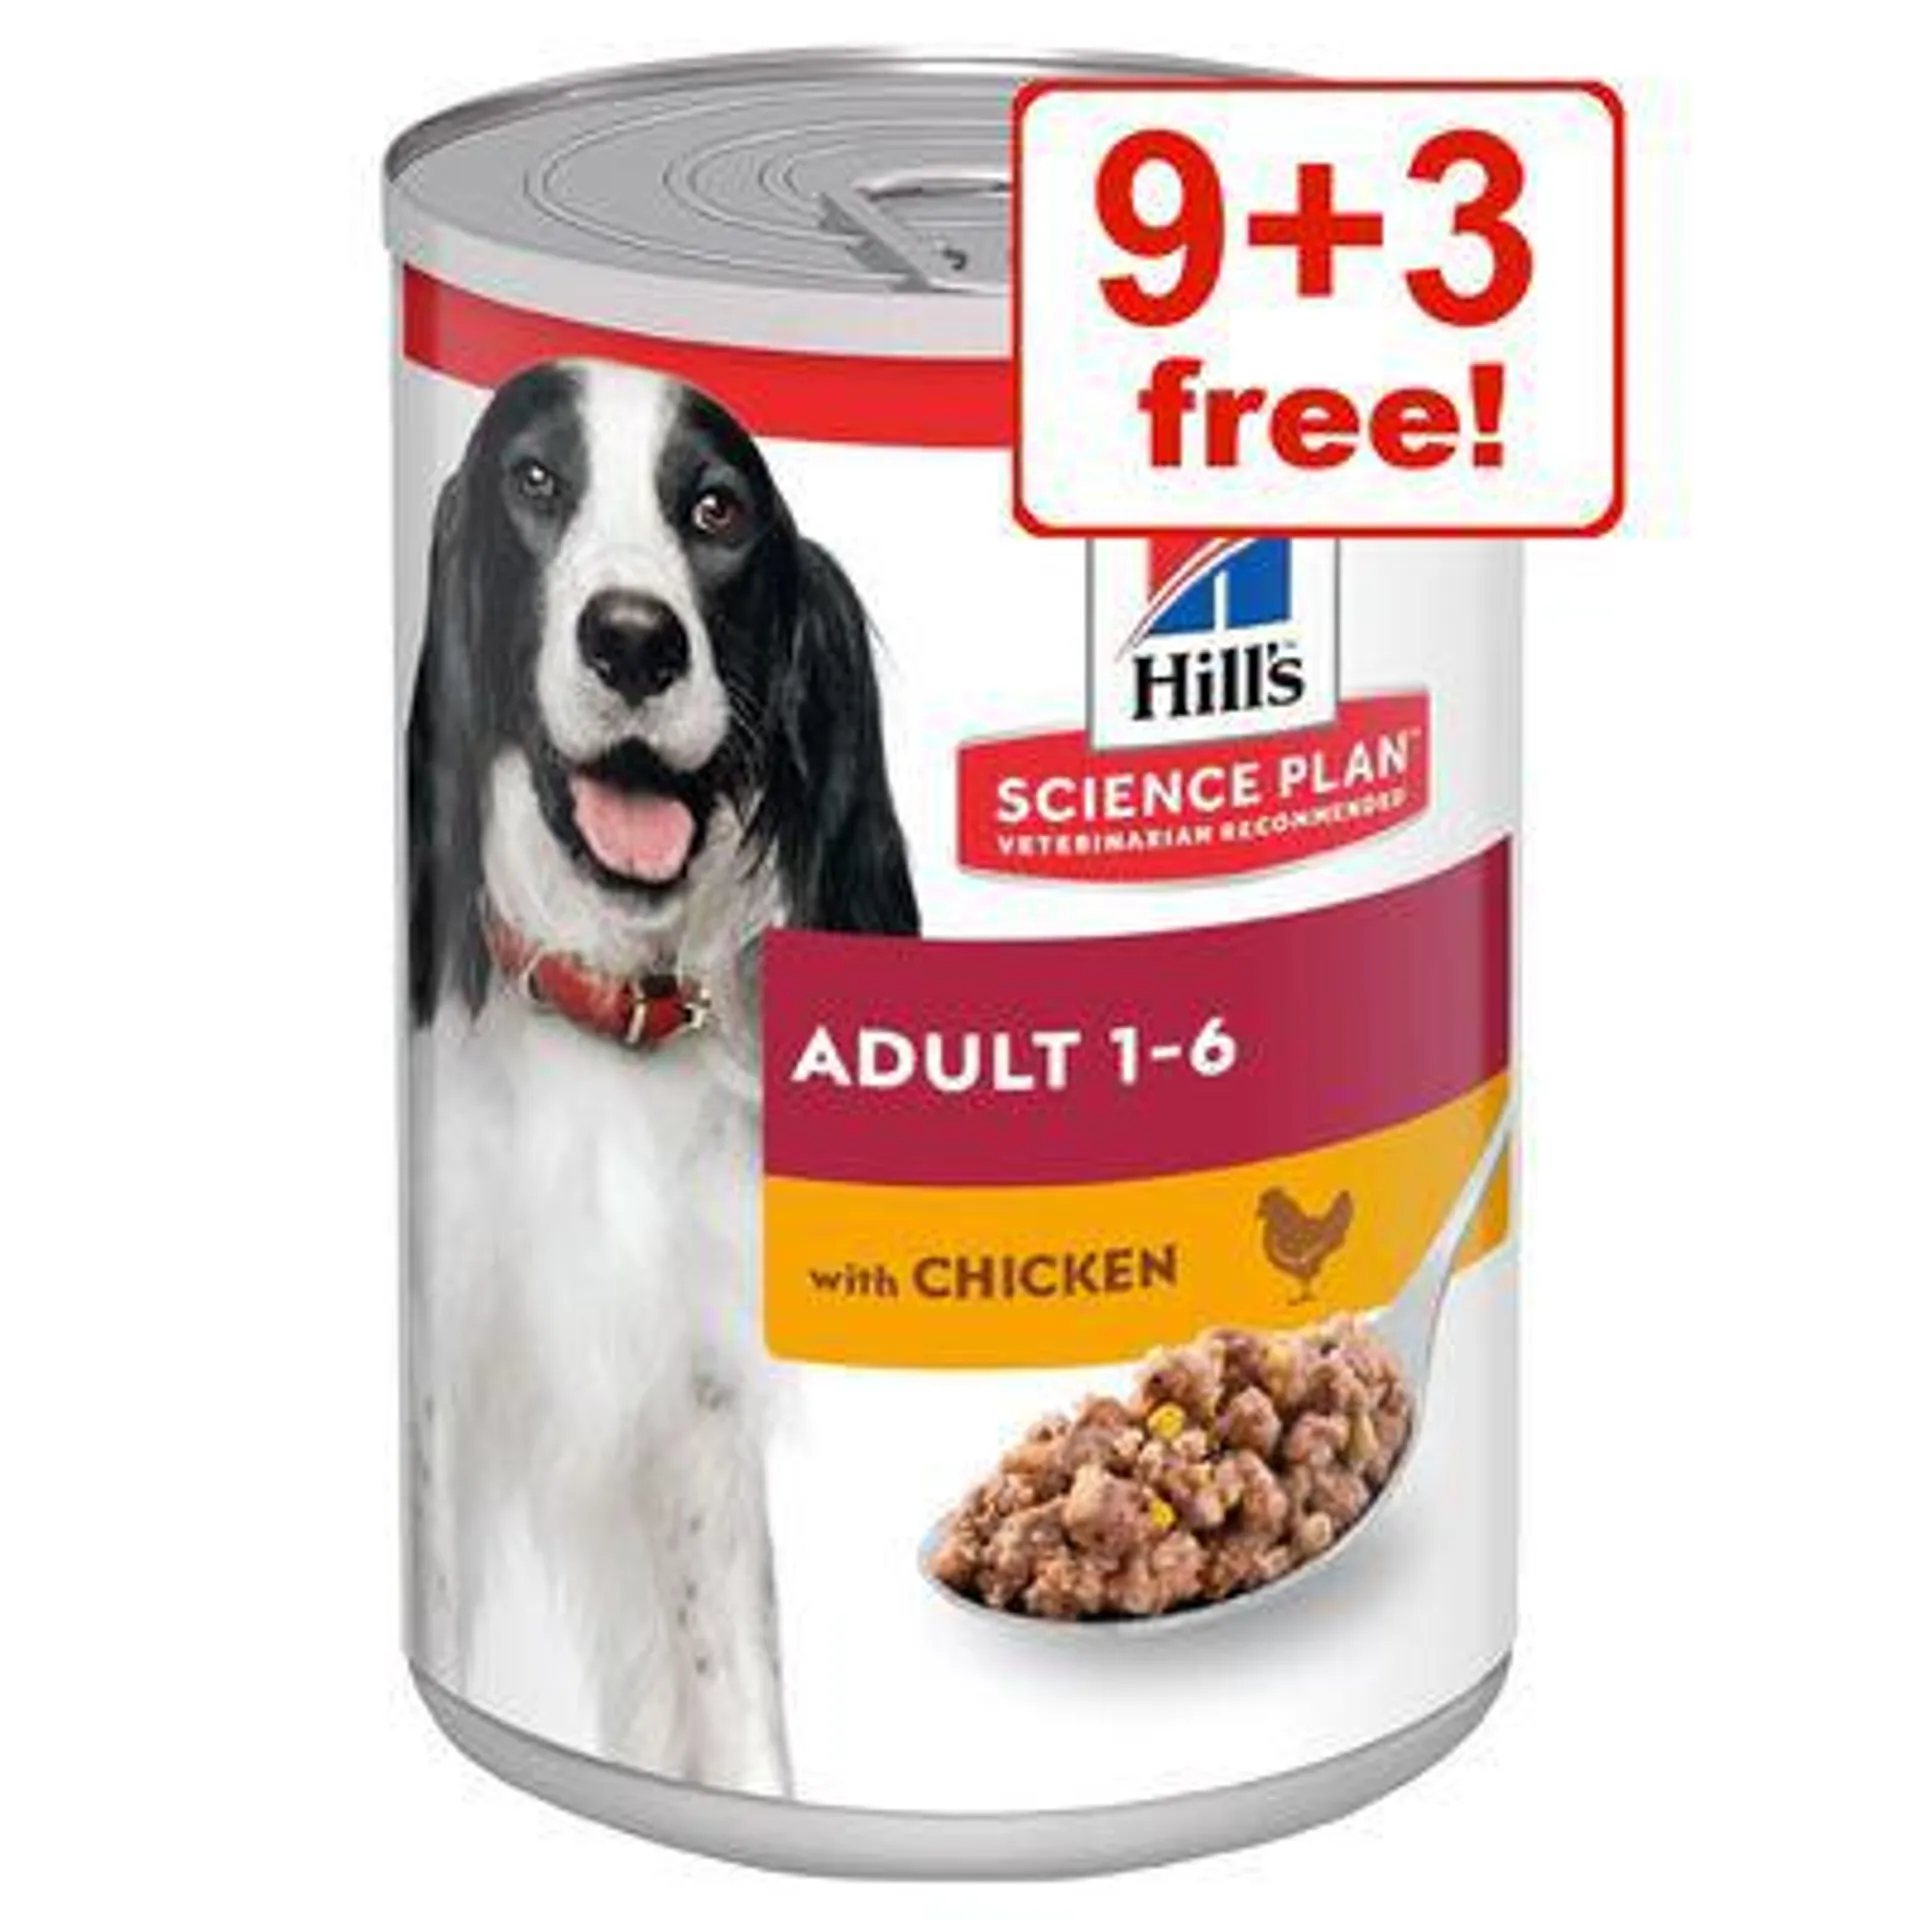 12 x 370g Hill's Science Plan Wet Dog Food - 9 + 3 Free! *